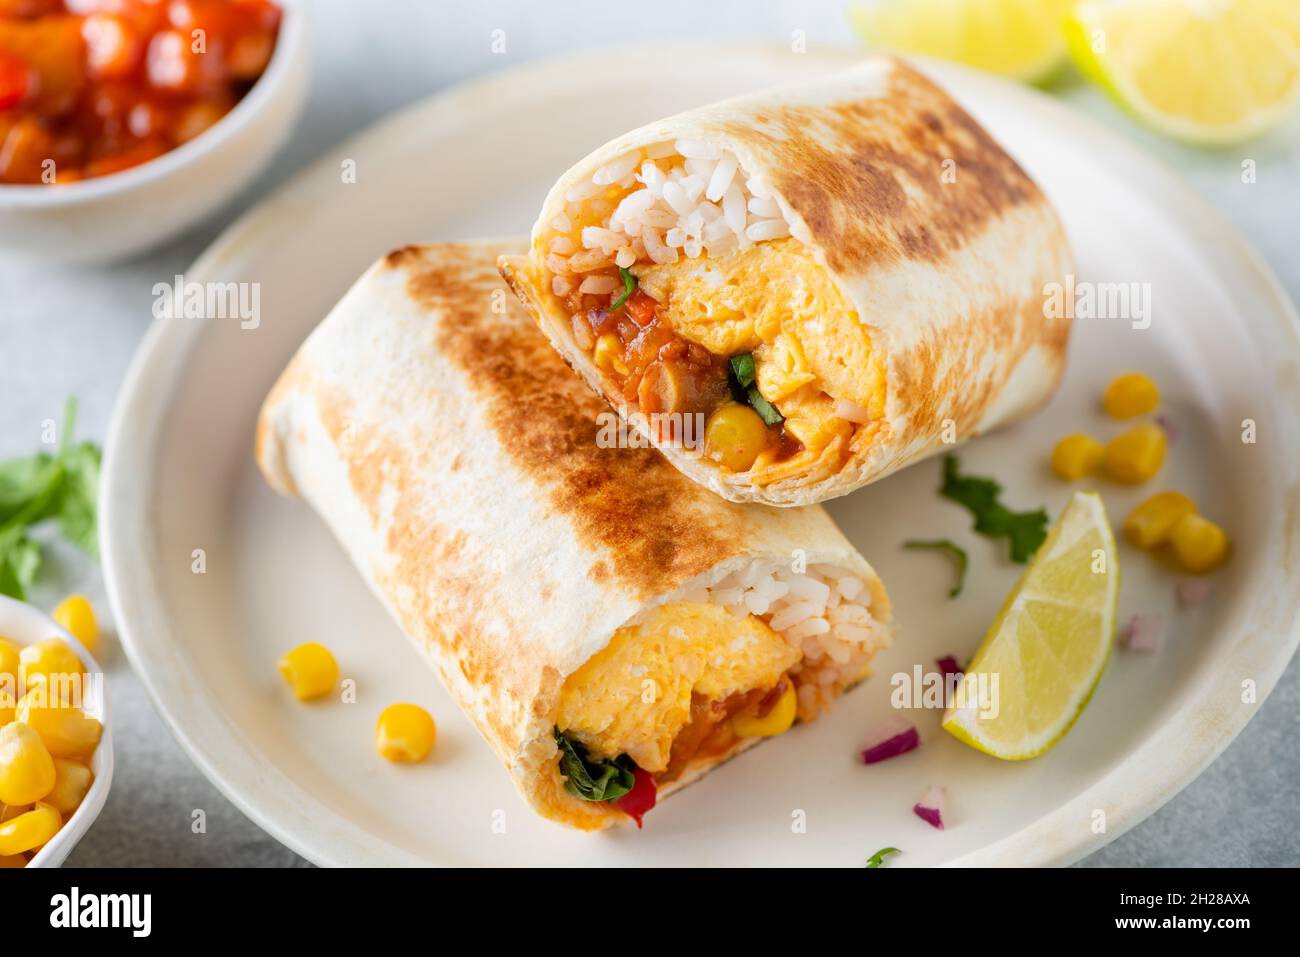 Breakfast tortilla wrap with omelette and vegetables on a plate. Healthy vegetarian burrito with eggs Stock Photo